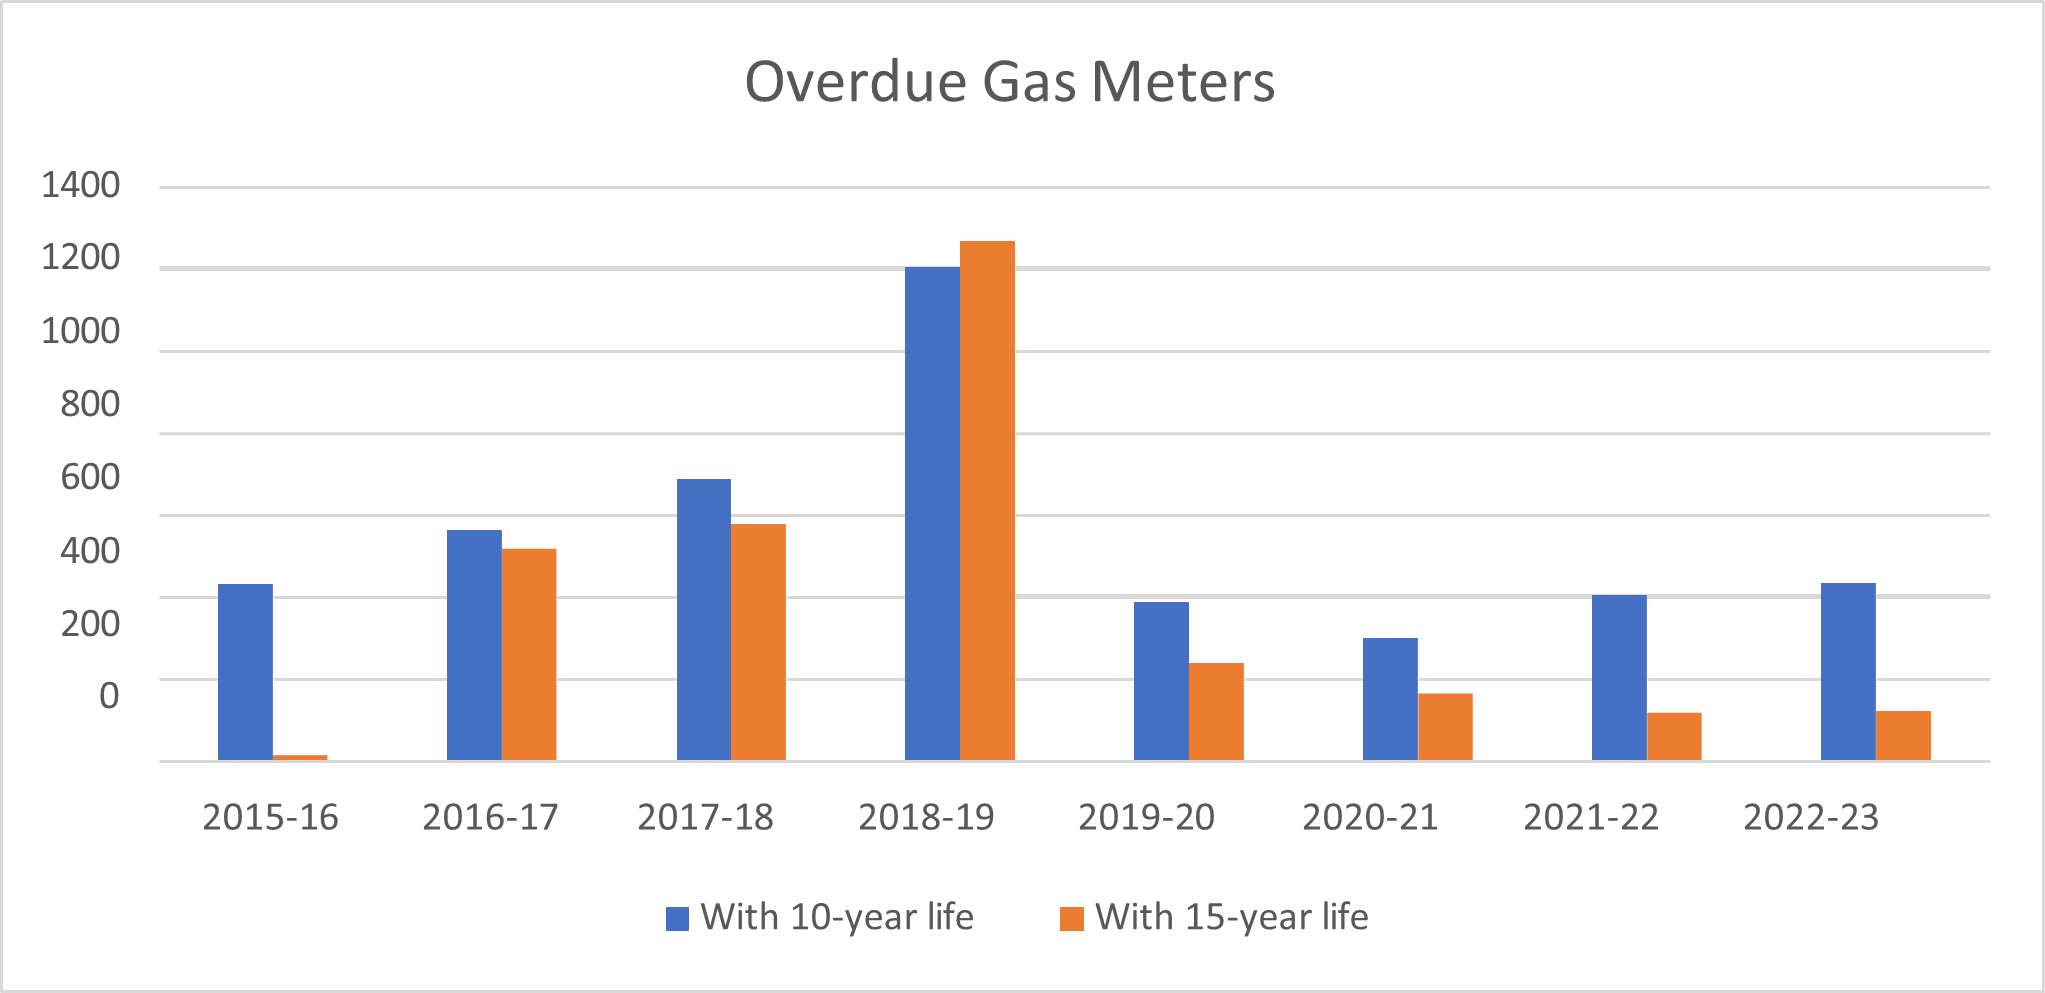 A chart showing overdue gas meters over the past 8 Financial years. It shows that for gas meters with a 10-year life, there has been an increase in overdue gas meters each year over the last three years. Whereas the figure for overdue gas meters with a 15-year life has reduced in the years following 2020-21.